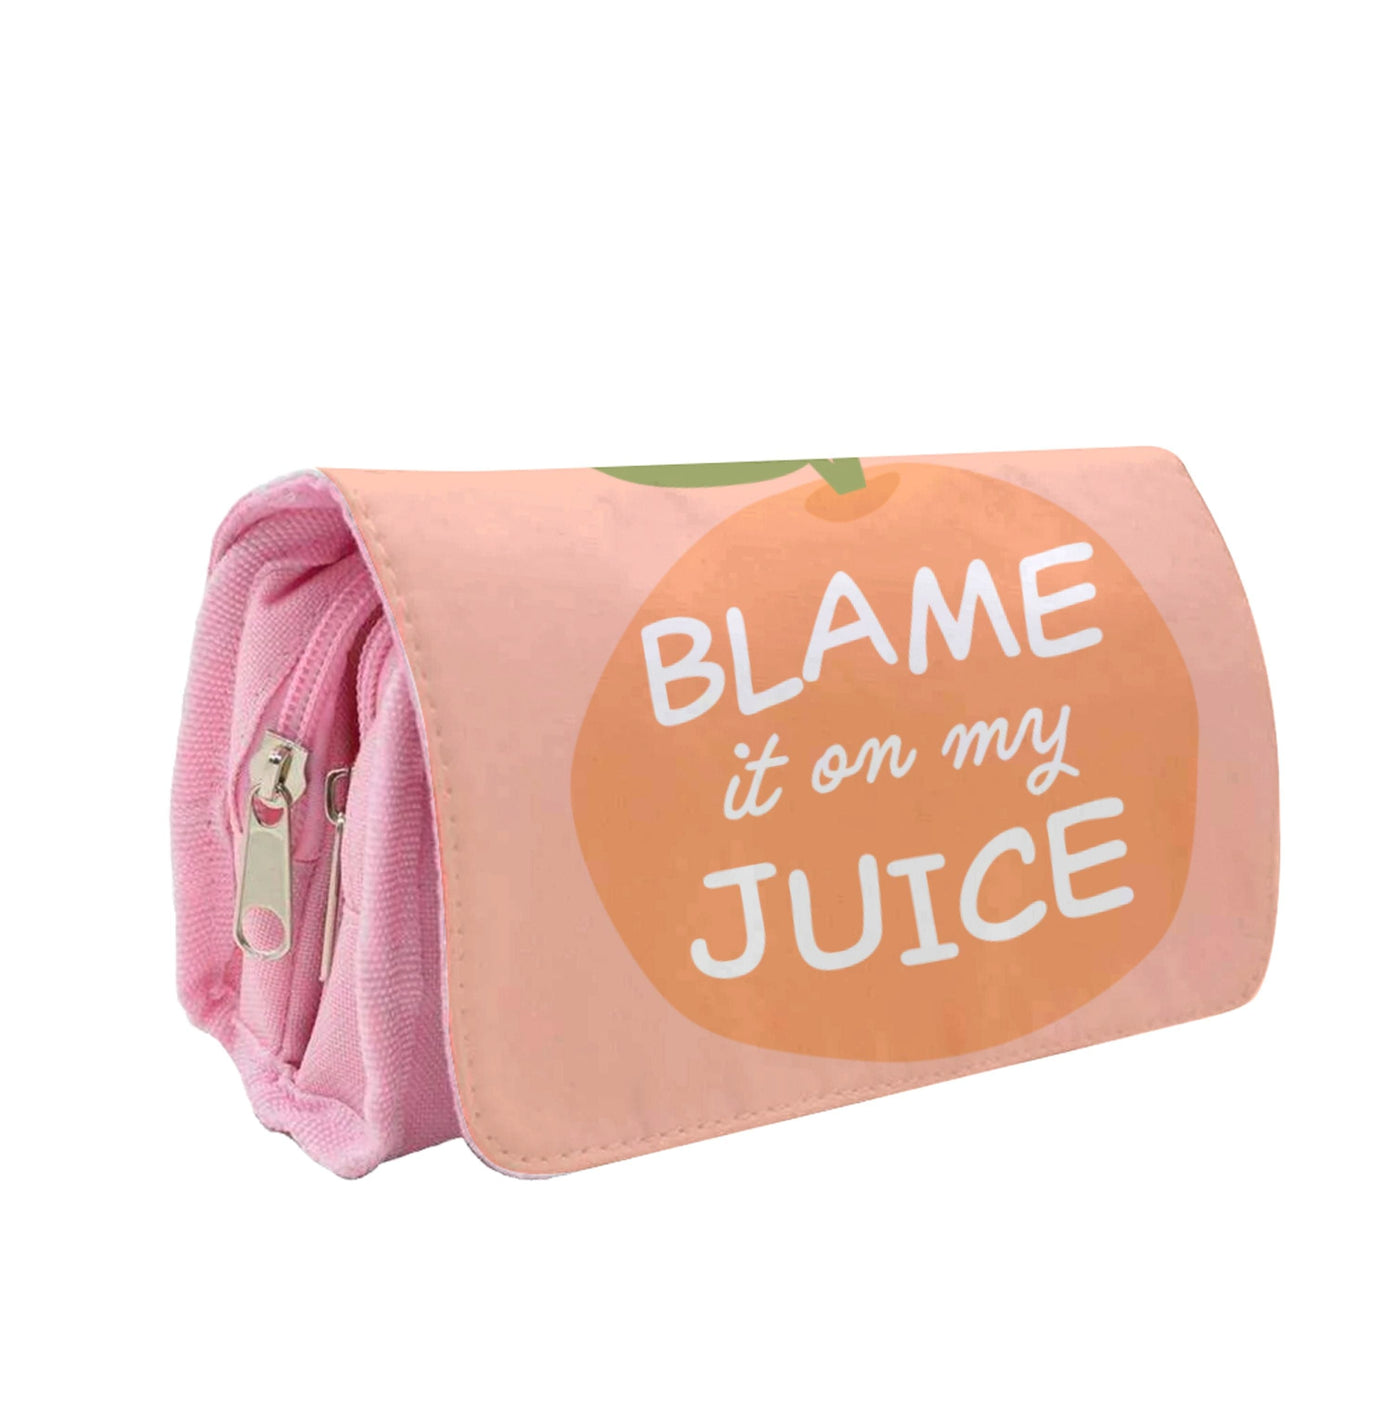 Blame It On My Juice - Lizzo Pencil Case